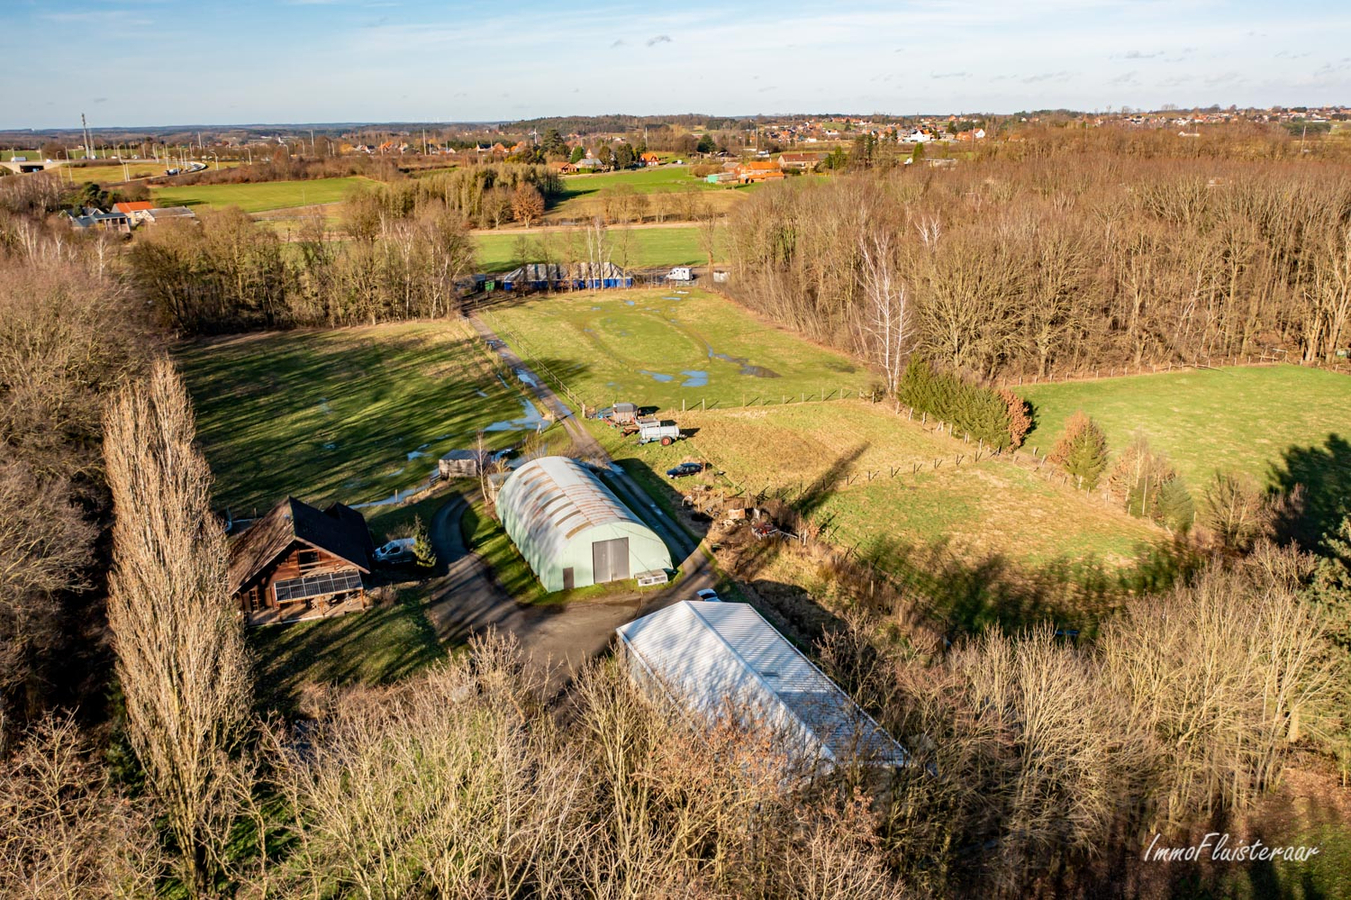 Chalet house, stable building, shed, gallop track, and pastures on approximately 9.5 hectares in Tielt-Winge (Flemish Brabant) 